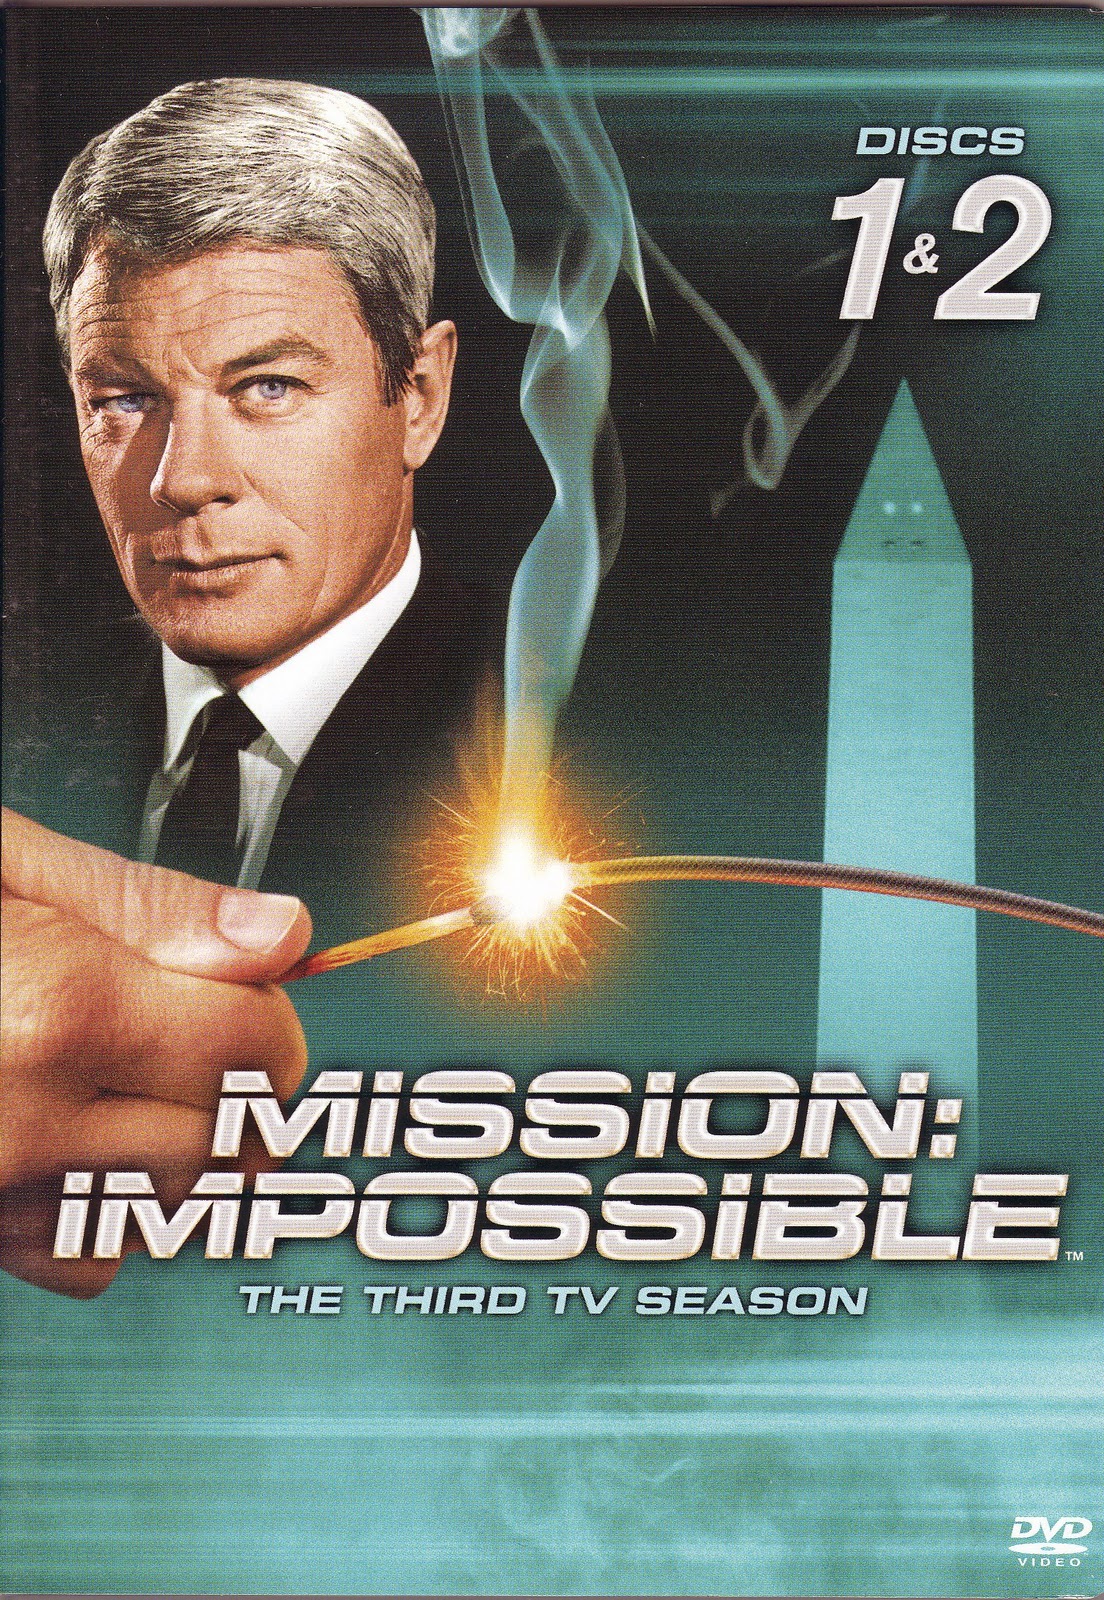 telecharger mission impossible 4 dvdrip french